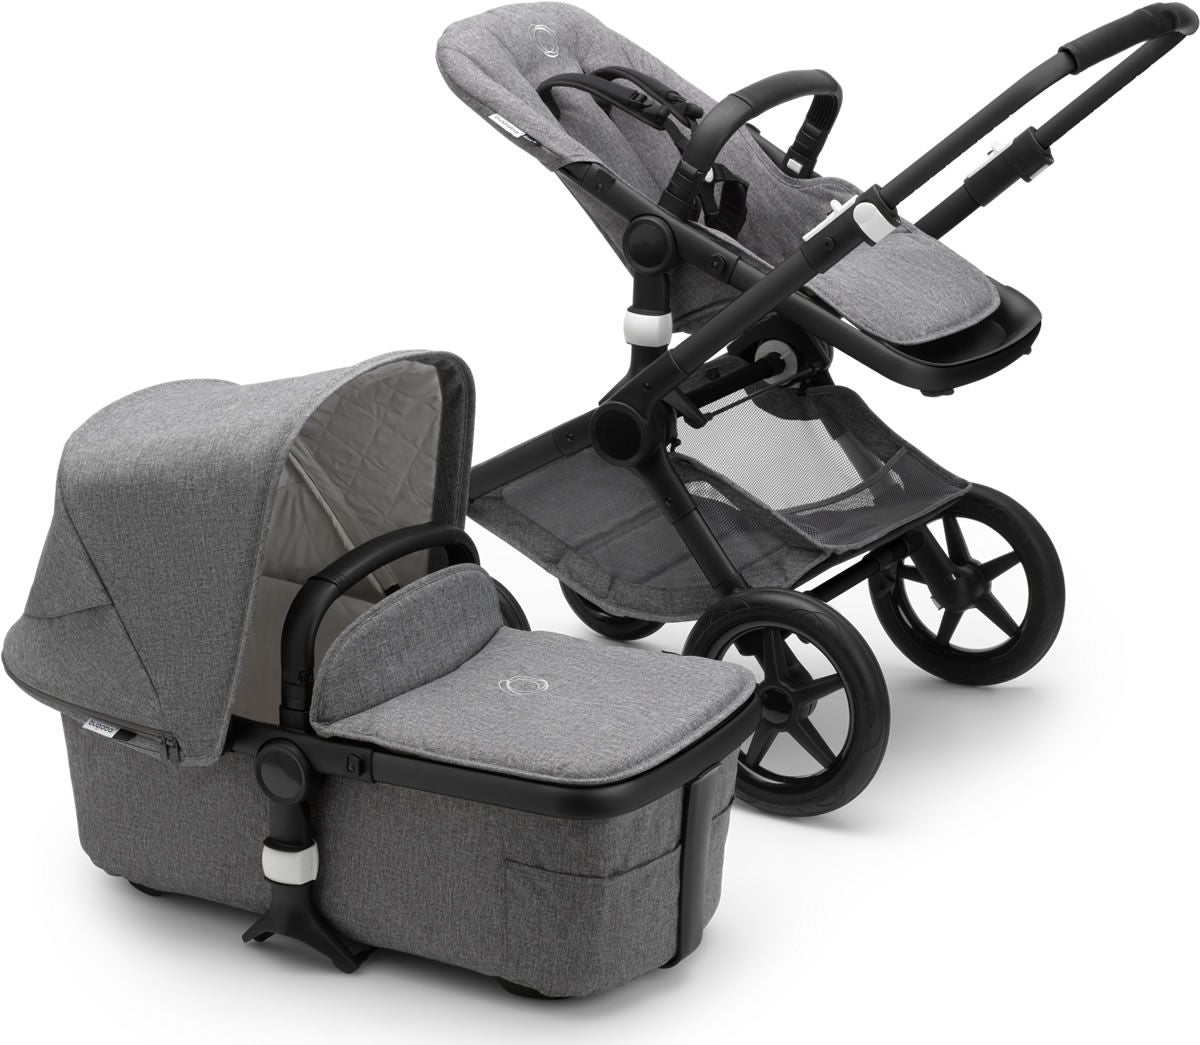 Bugaboo Fox 2 Classic Complete Stroller - ANB Baby -$1000 - $2000